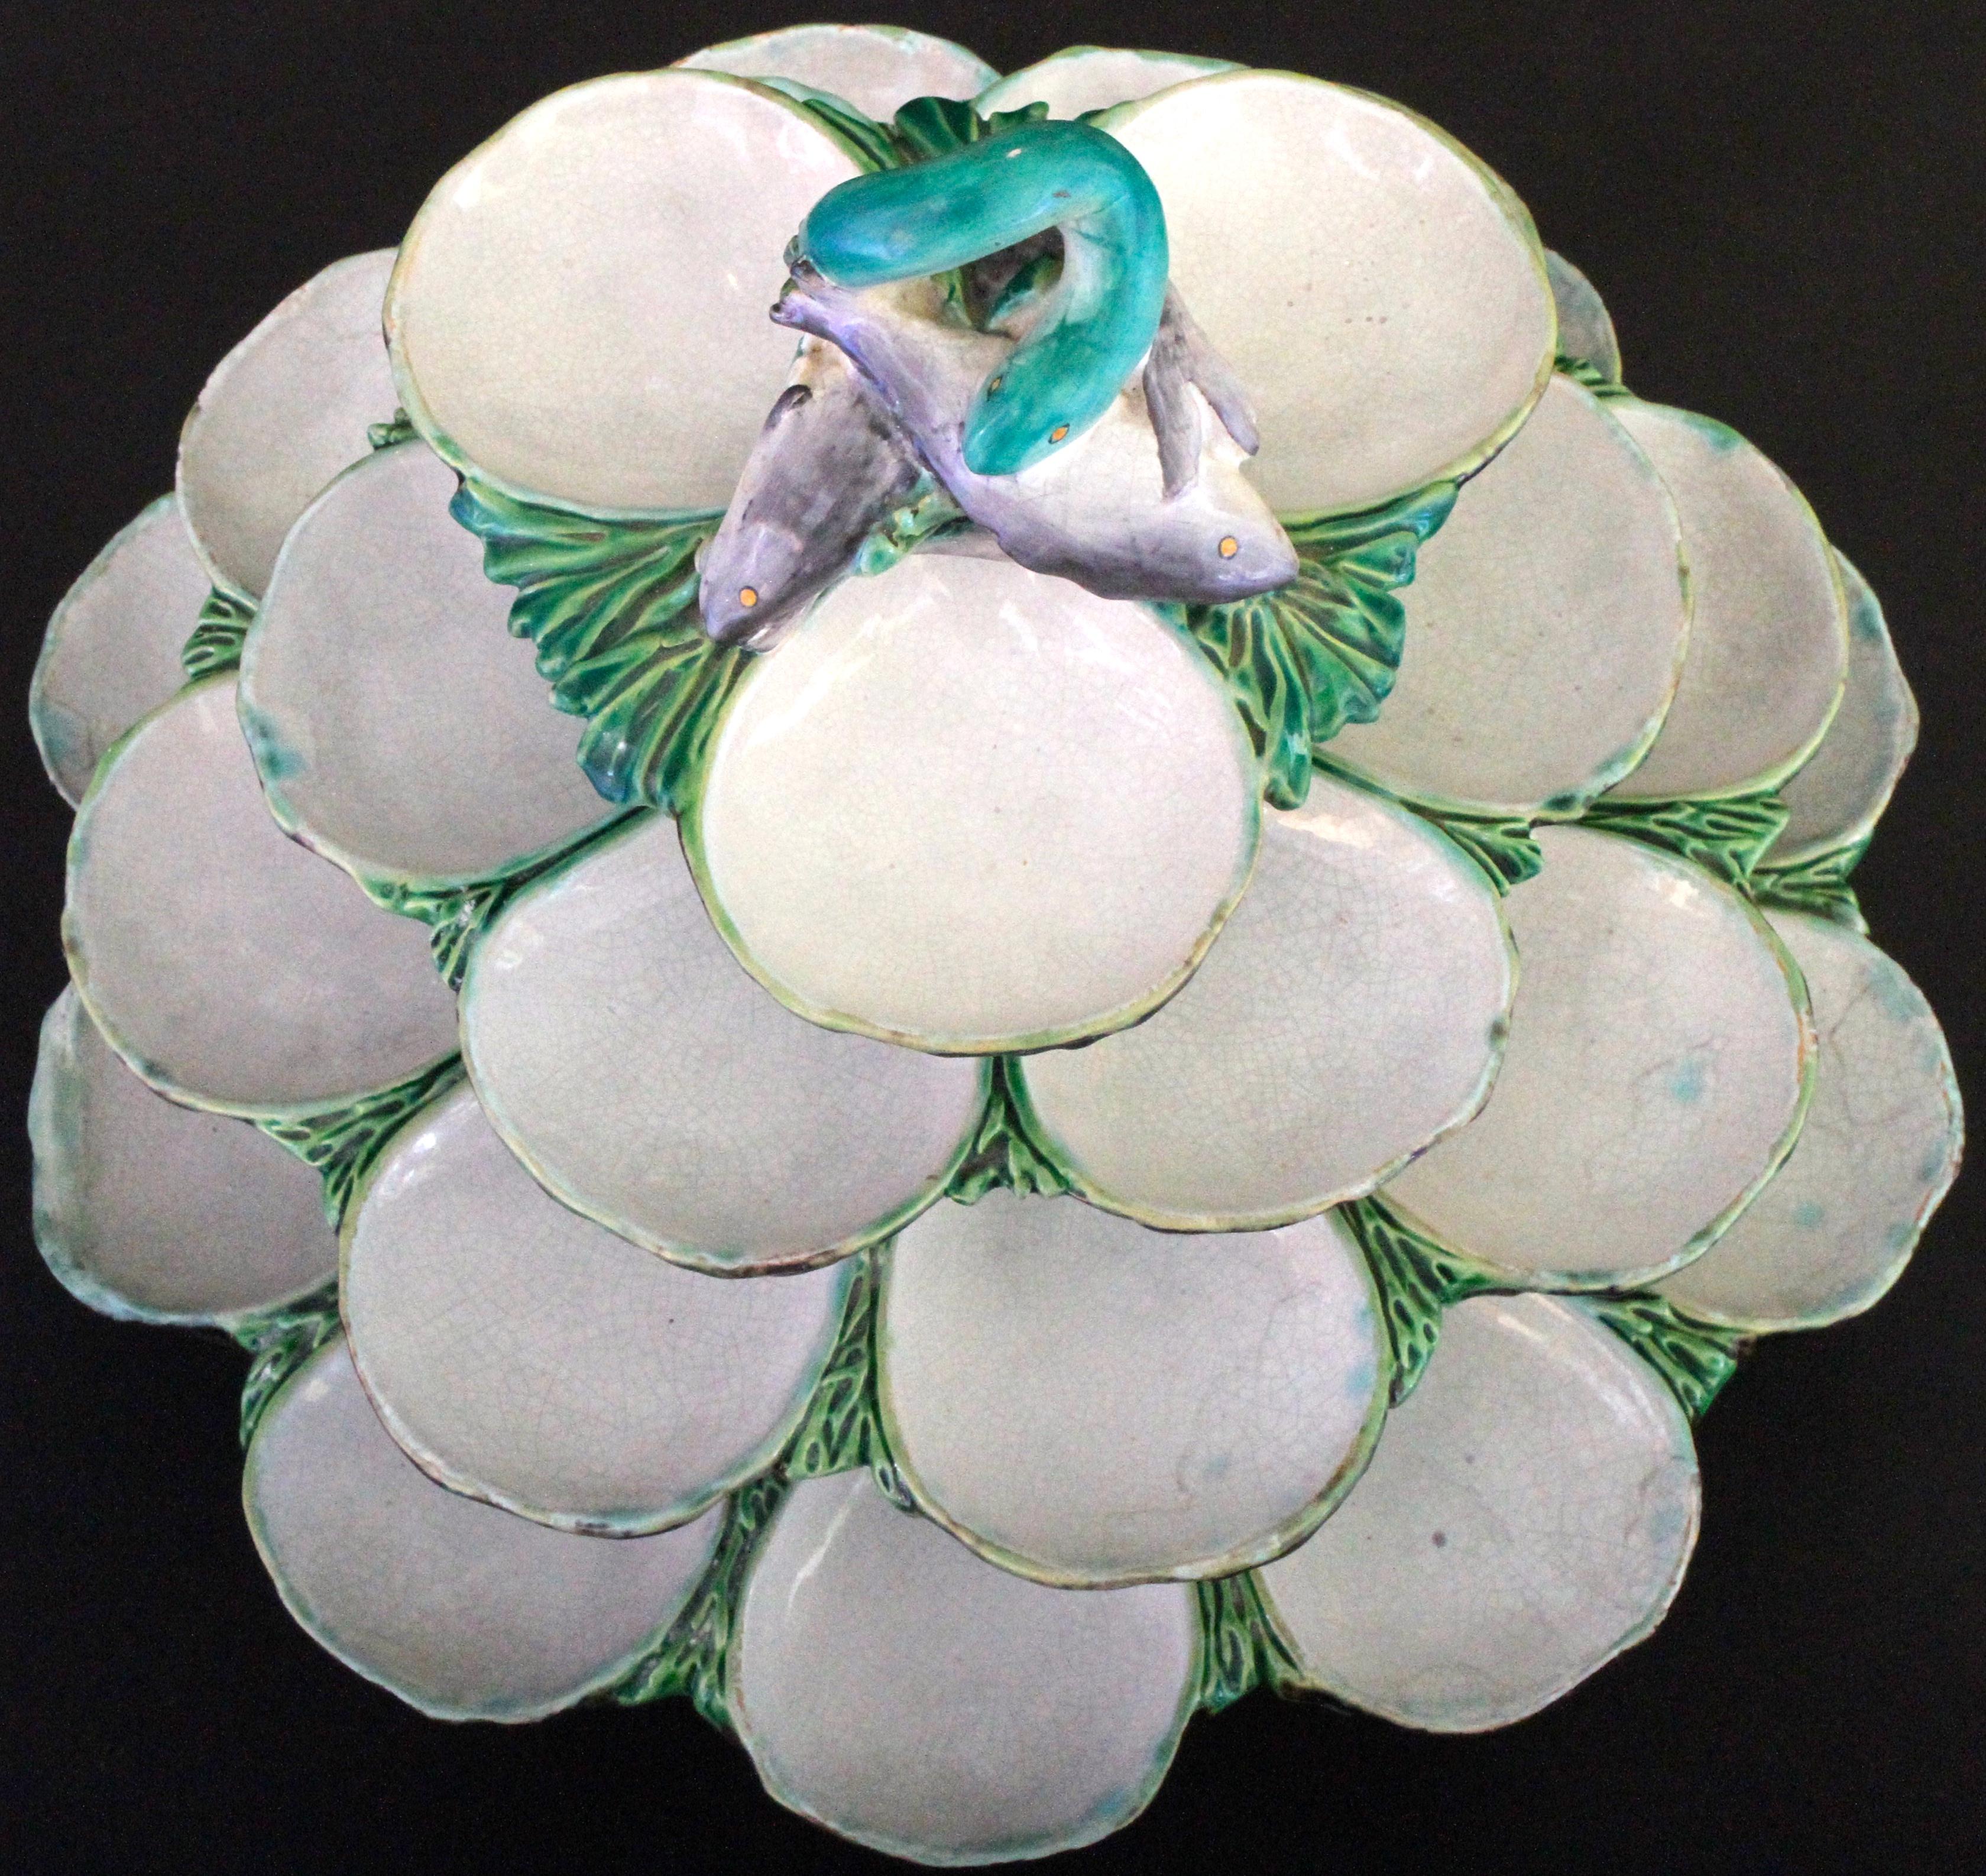 Hand-Painted 19th Century Minton Majolica Revolving Oyster Server For Sale